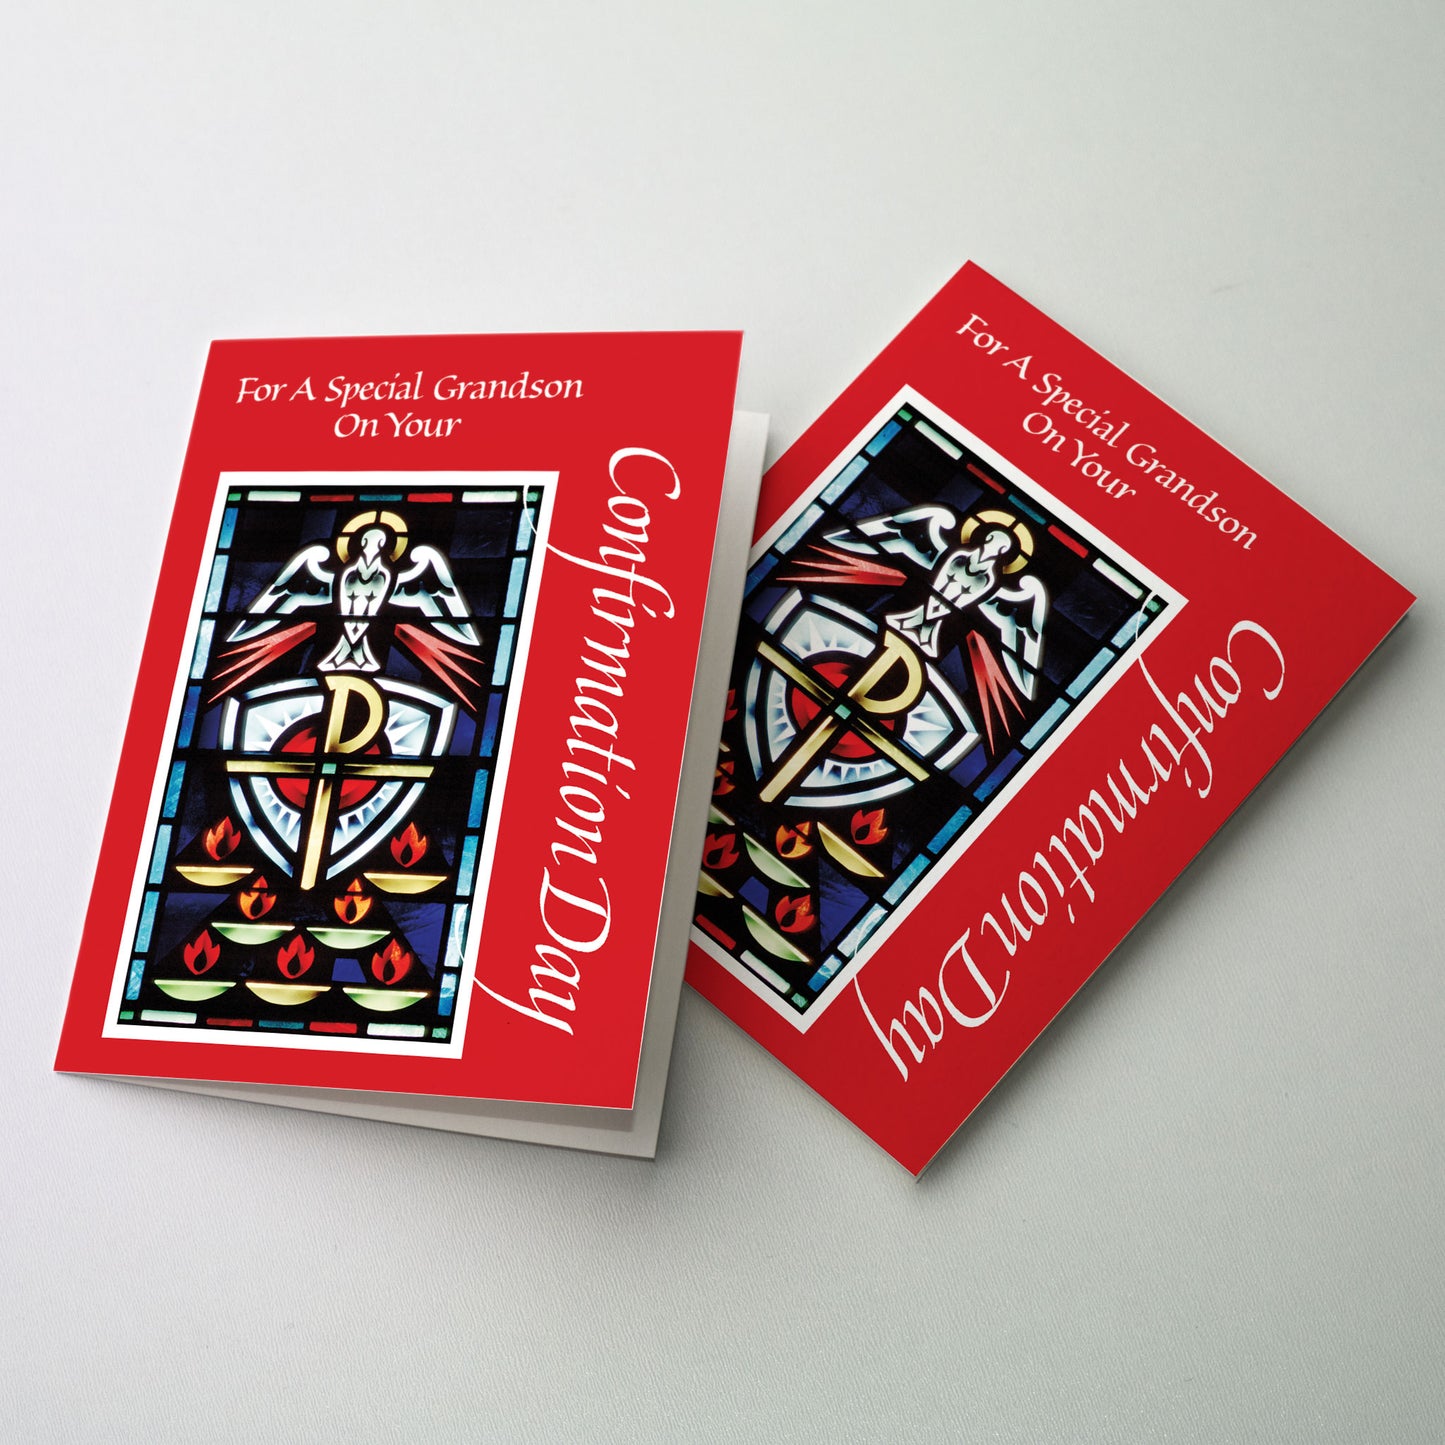 For a Special Grandson on Your Confirmation Day - Confirmation Card for Grandson